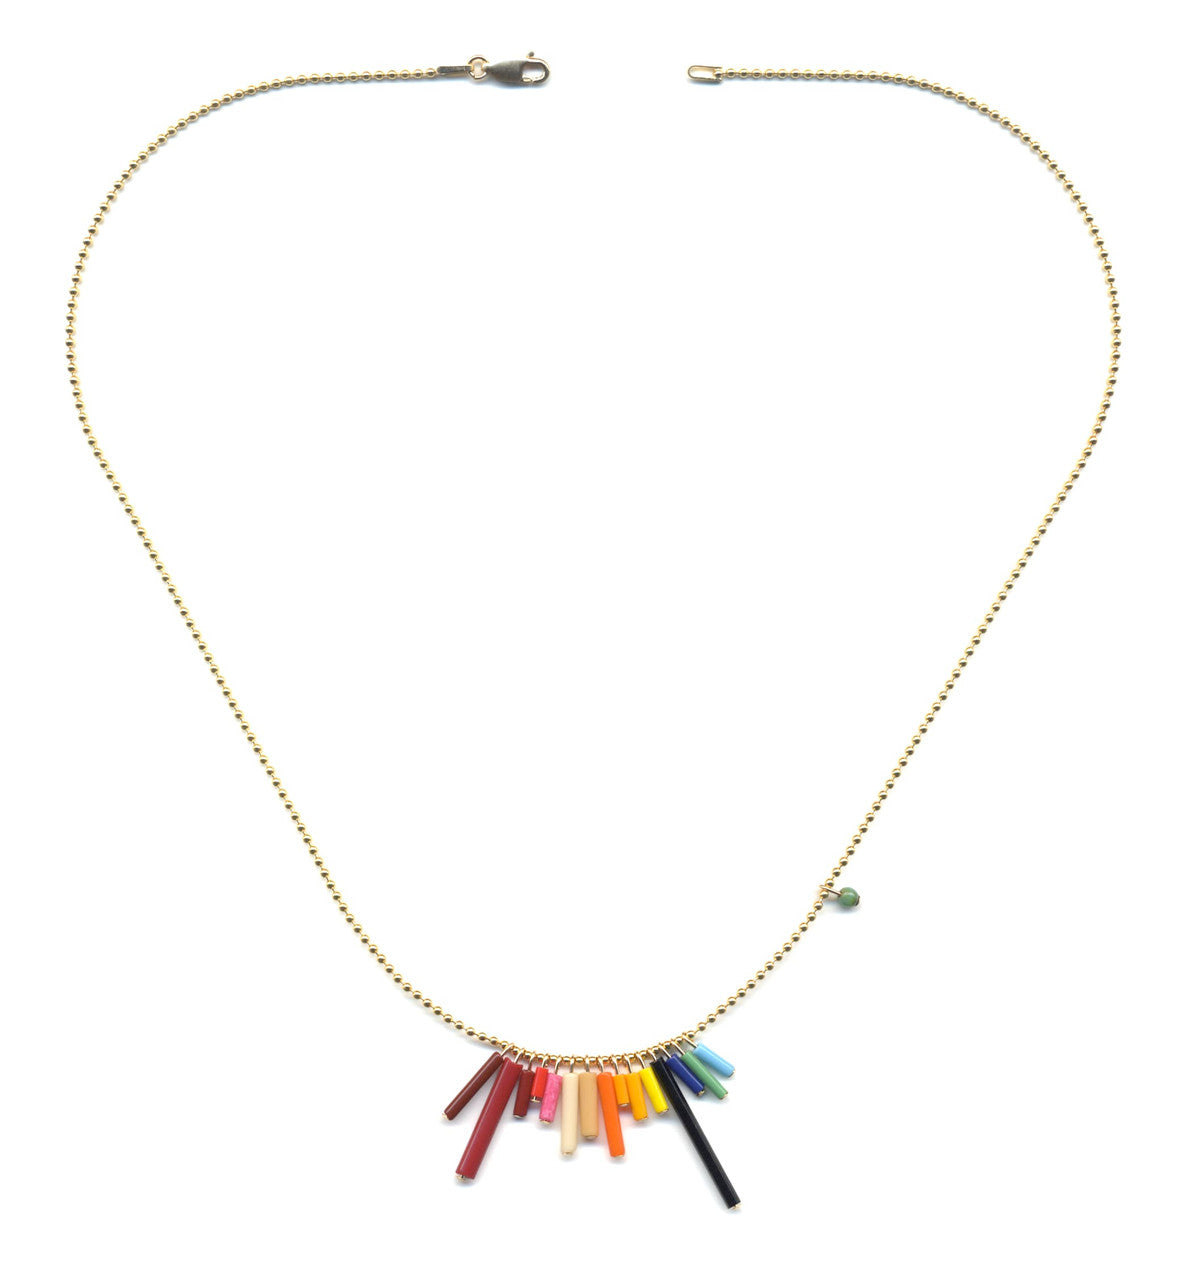 irk-n1881 Necklace by I. Ronni Kappos  (IRK Jewelry)